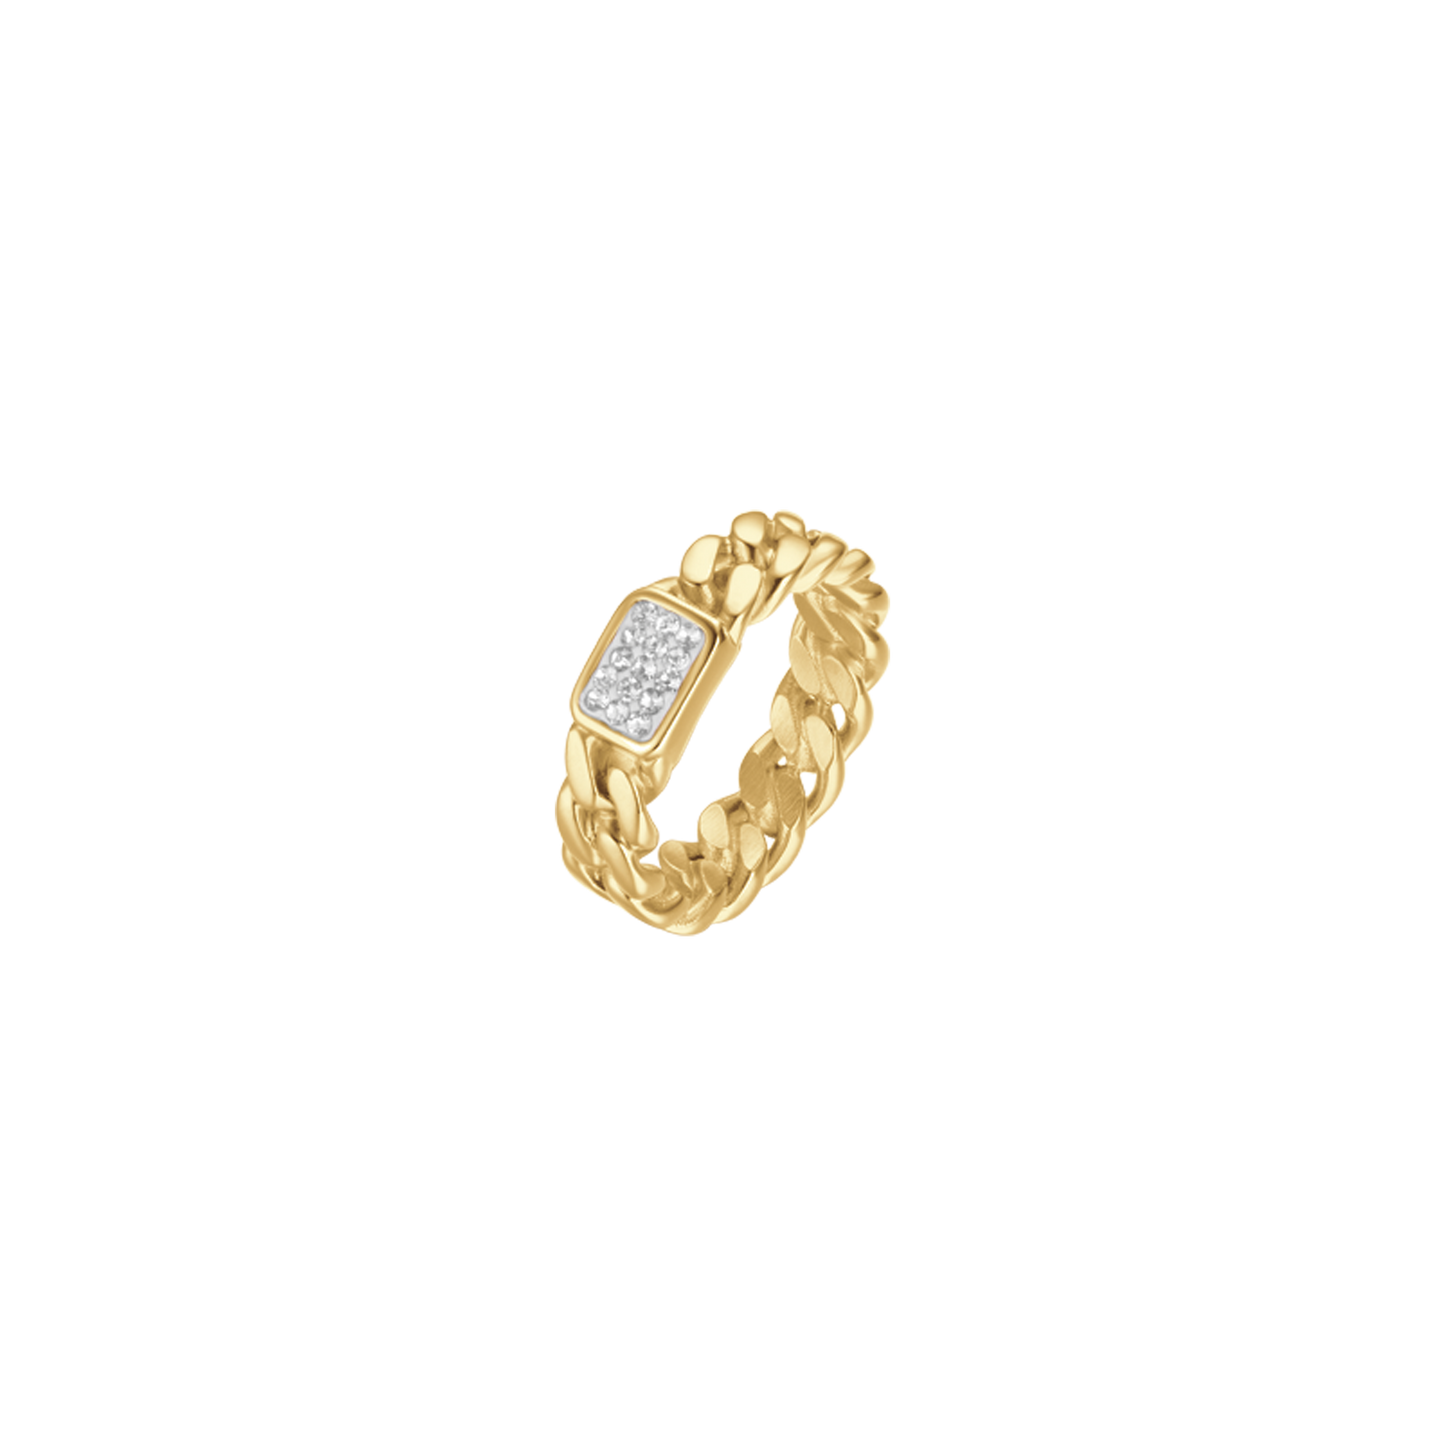 IP GOLD STEEL RING WITH WHITE CRYSTALS